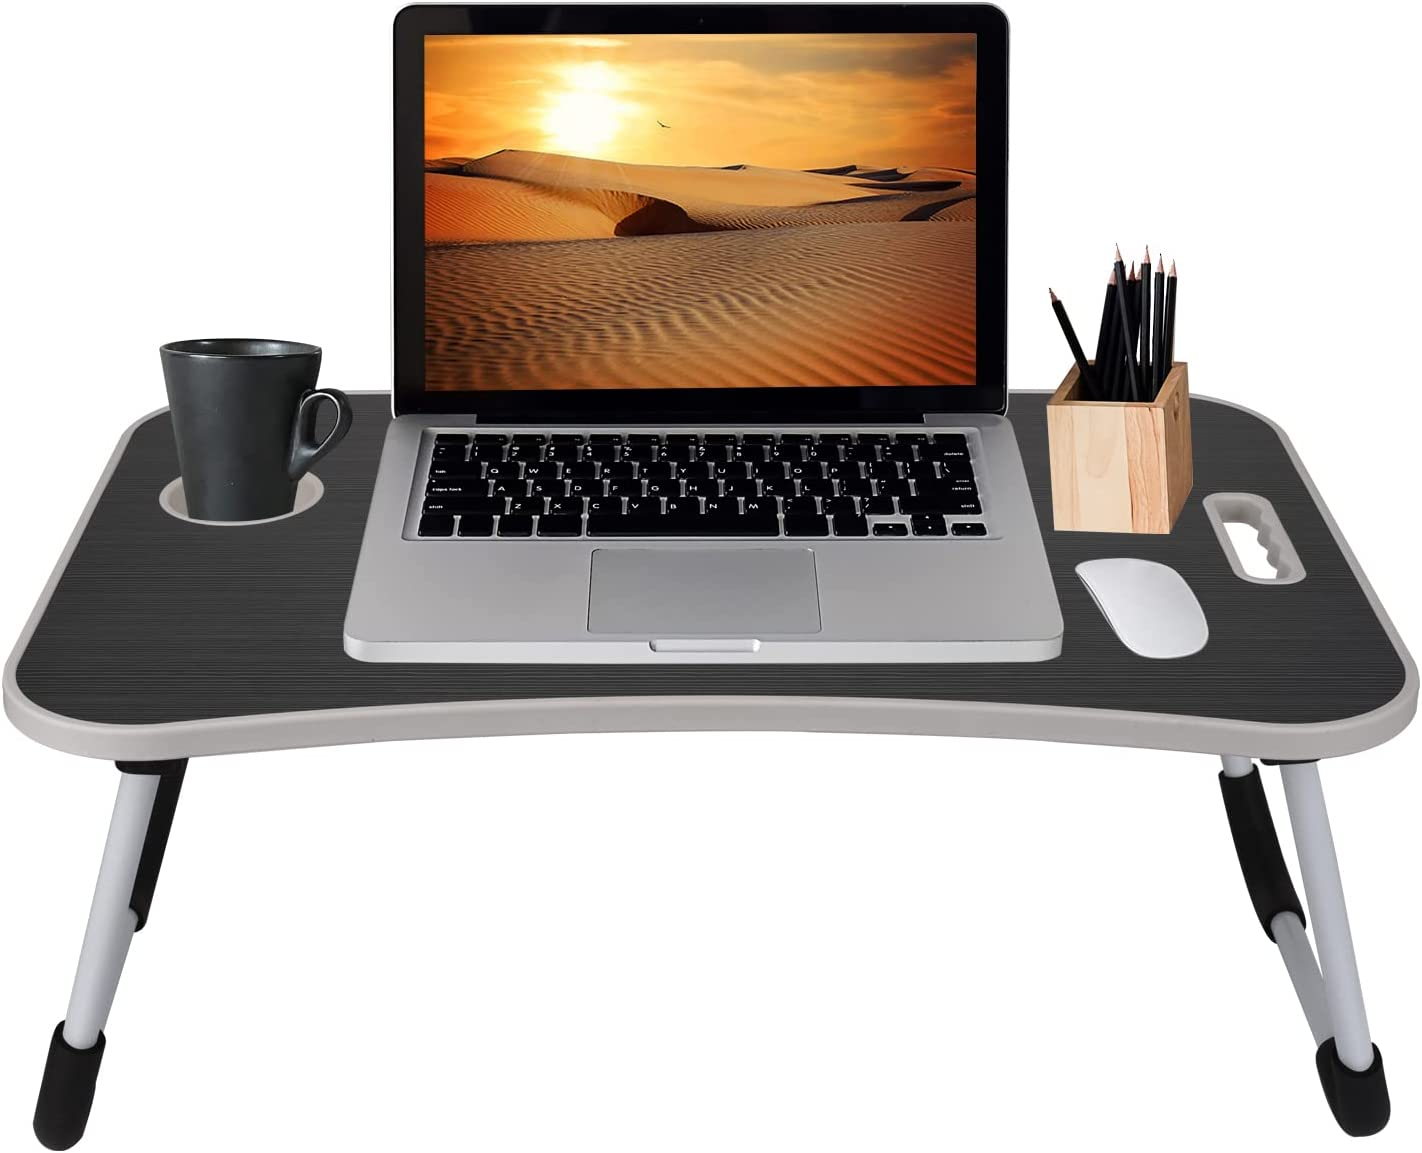 The benefits of using a lap desk like this, when gaming, include your keyboard and other equipment not resting on your legs directly, and foldable legs for convenient storage.